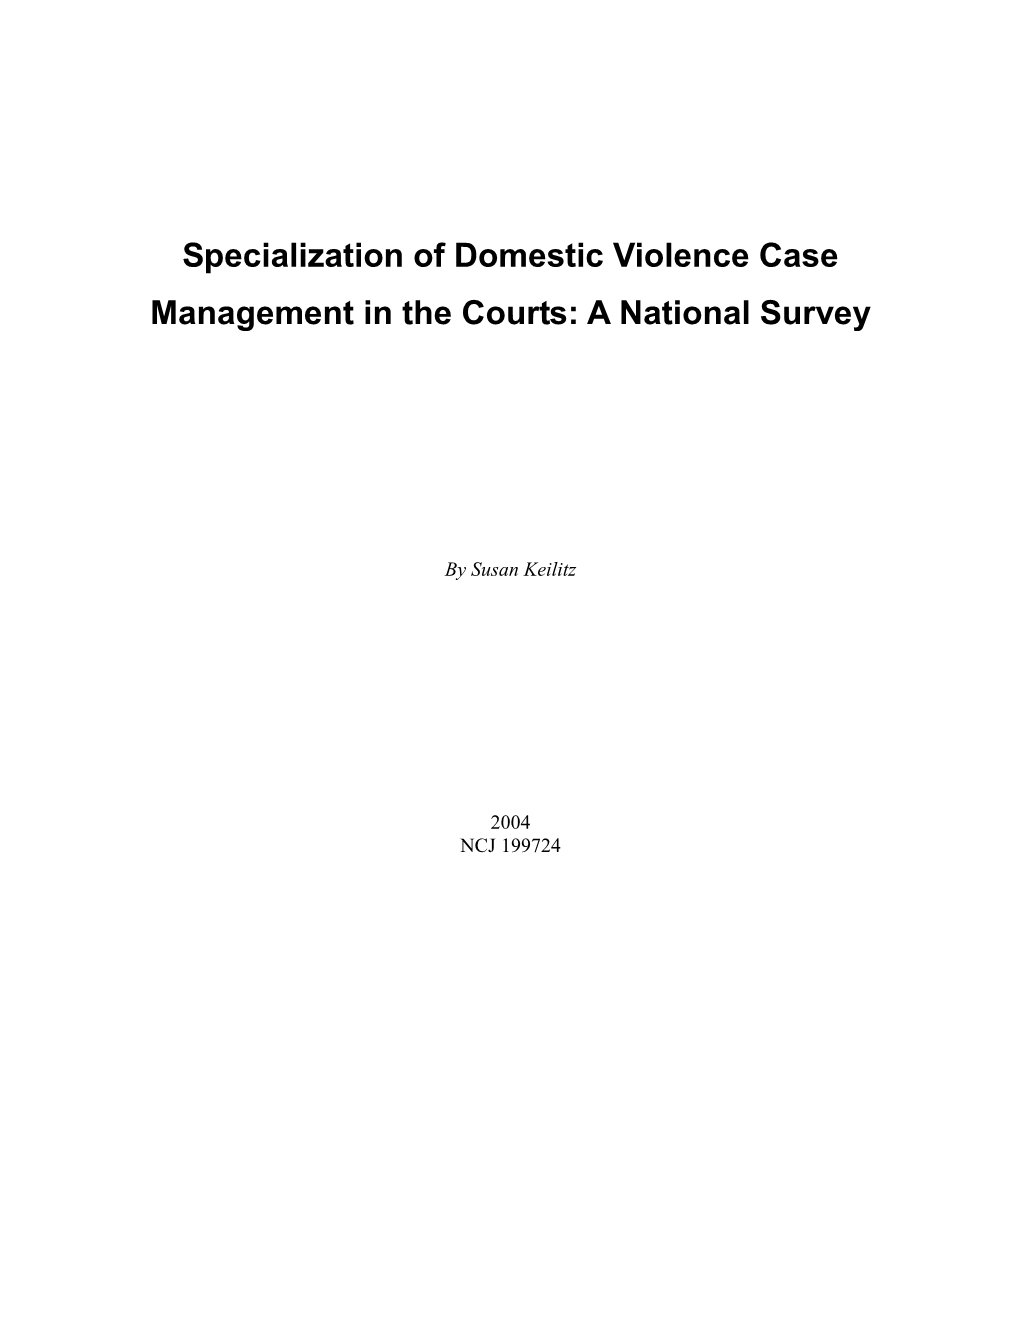 "Specialization of Domestic Violence Case Management in the Courts: A